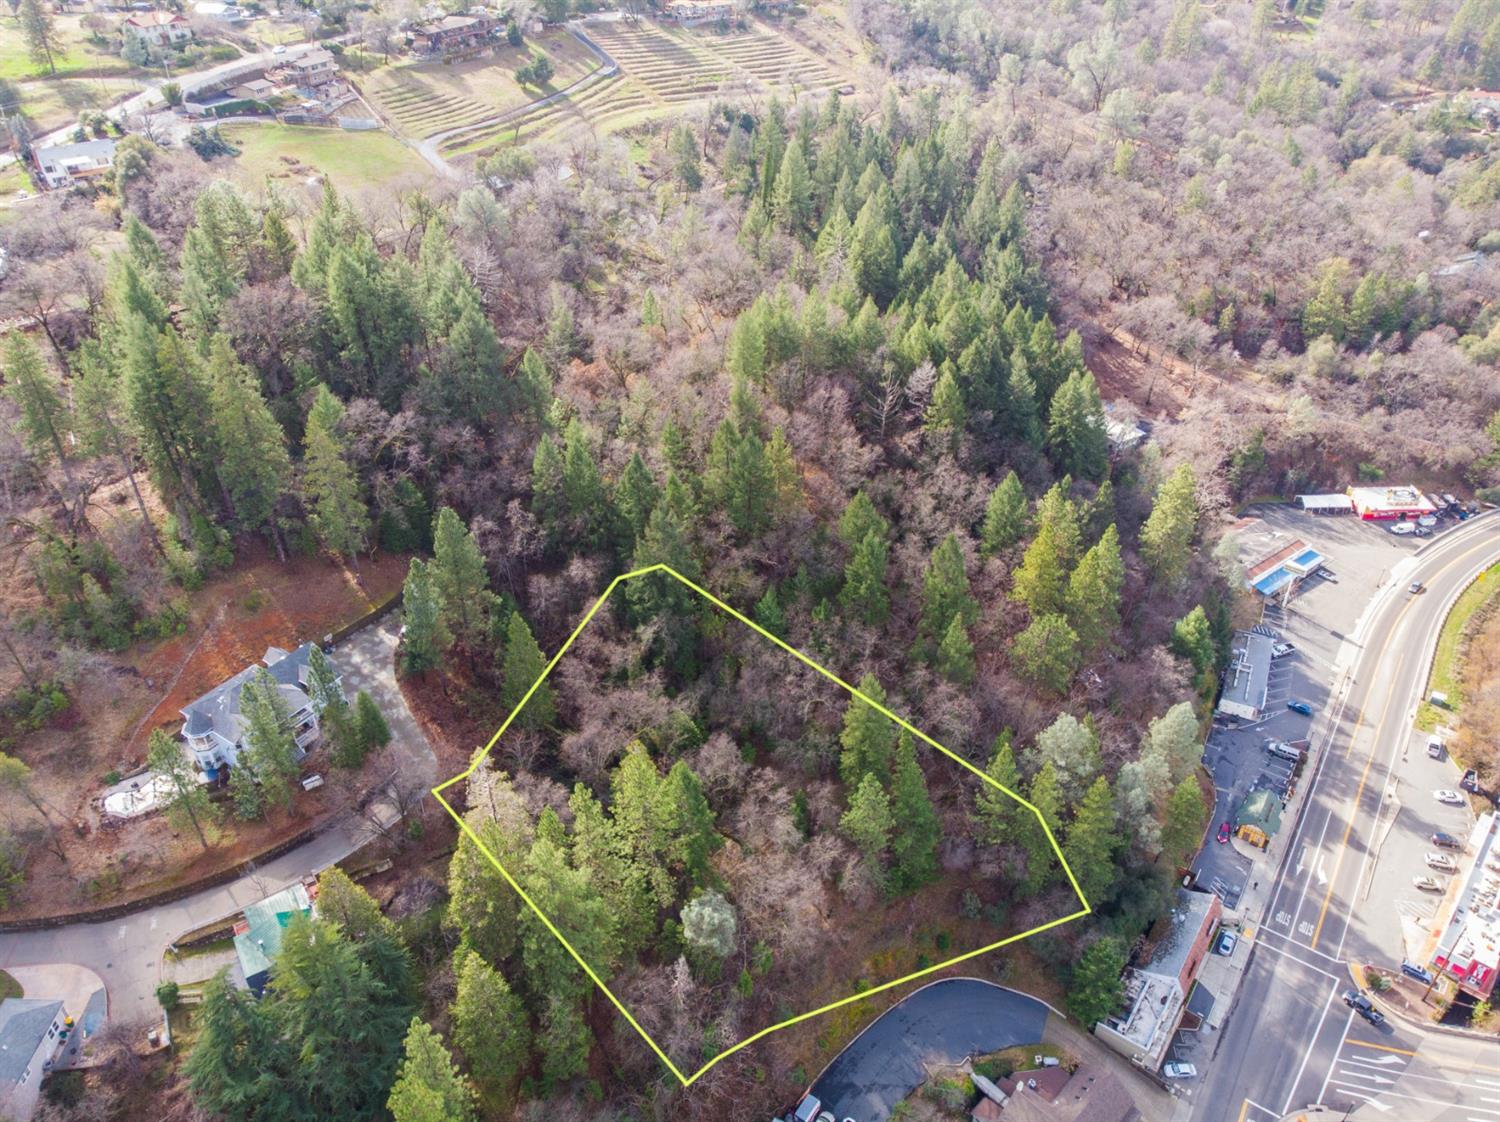 Build your dream home on this one acre lot in the city of Placerville! Great location in a neighborhood of built homes, and walking distance to great shopping and dining in Placerville. Close to the highway for short drives to Apple Hill and Tahoe!